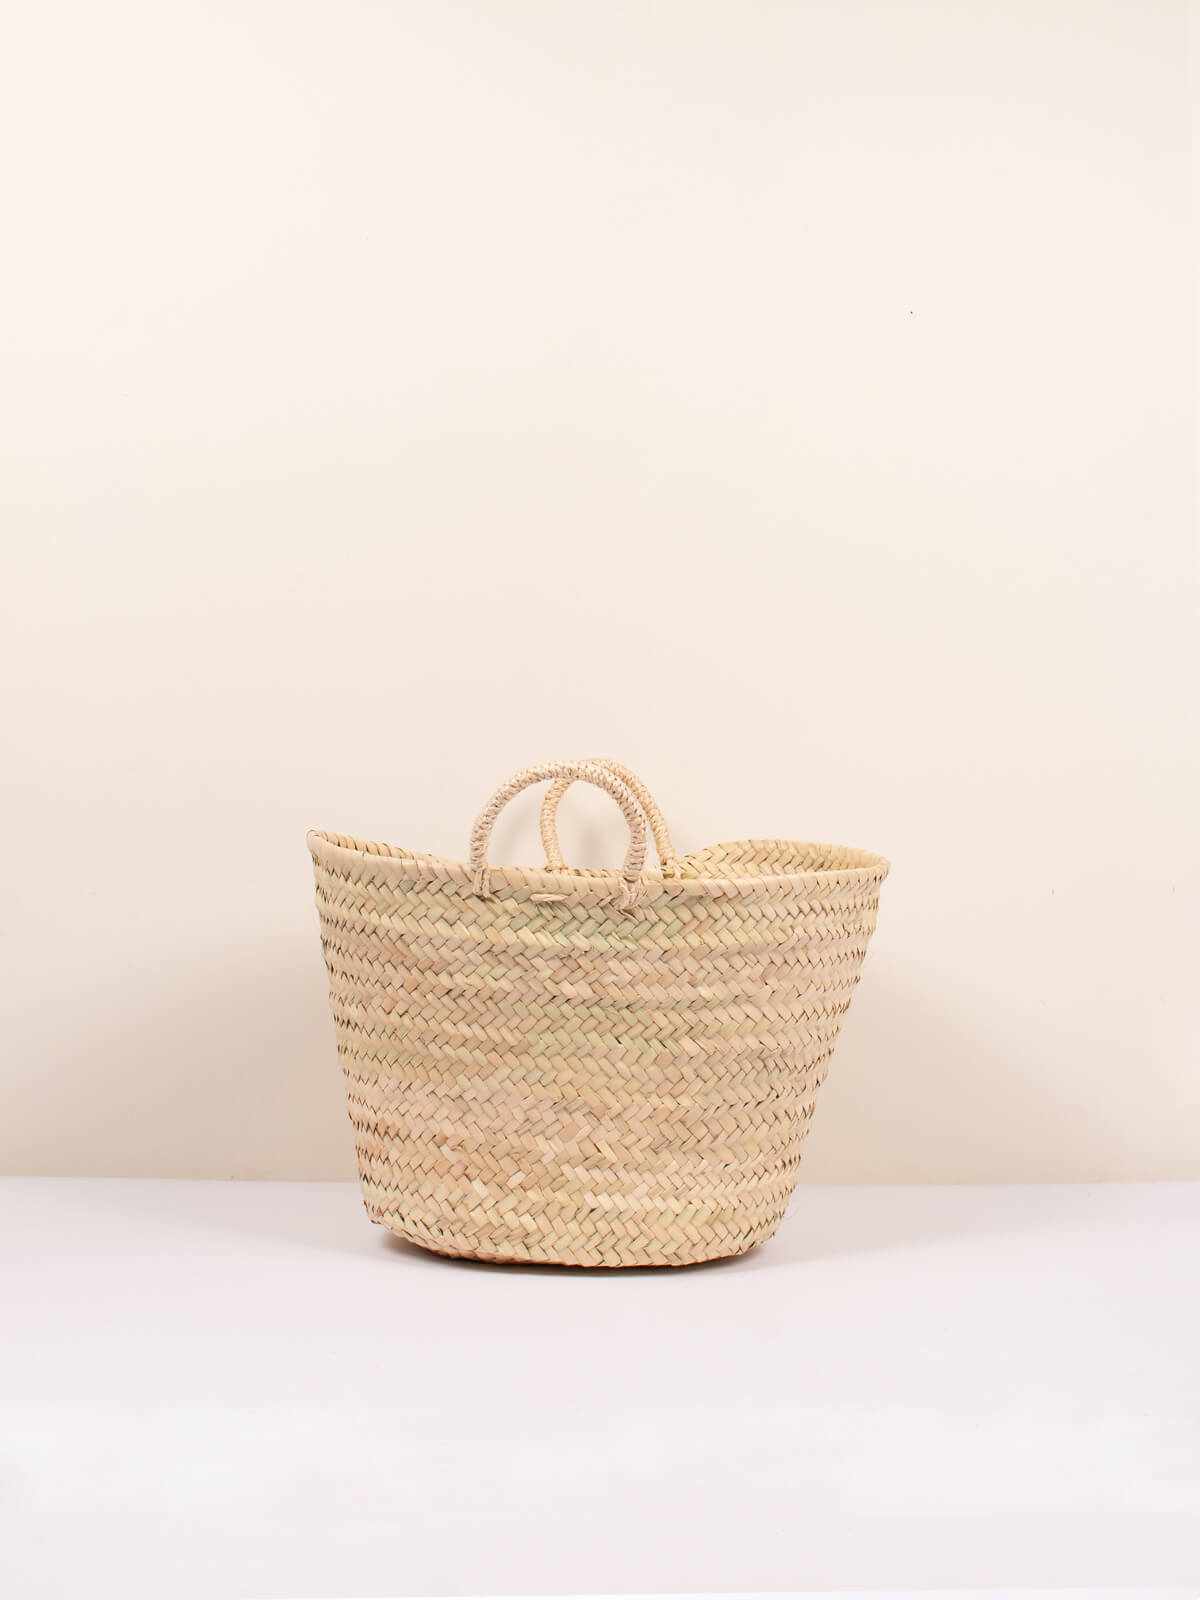 50% off STRAW BAG Handmade With Leather French Market Basket 